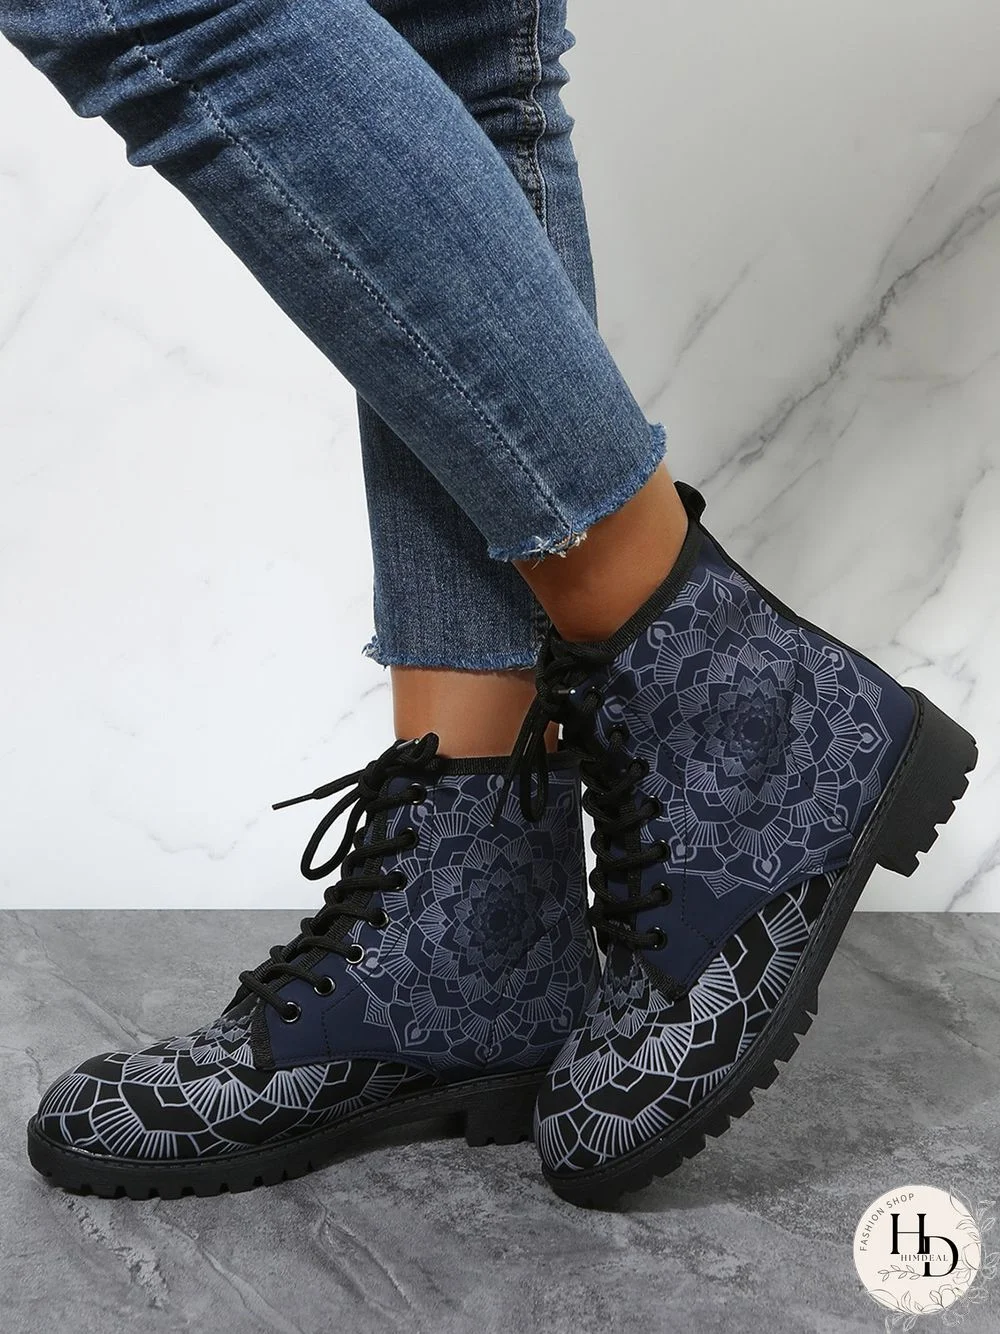 Kaleidoscope Print Ankle Boots